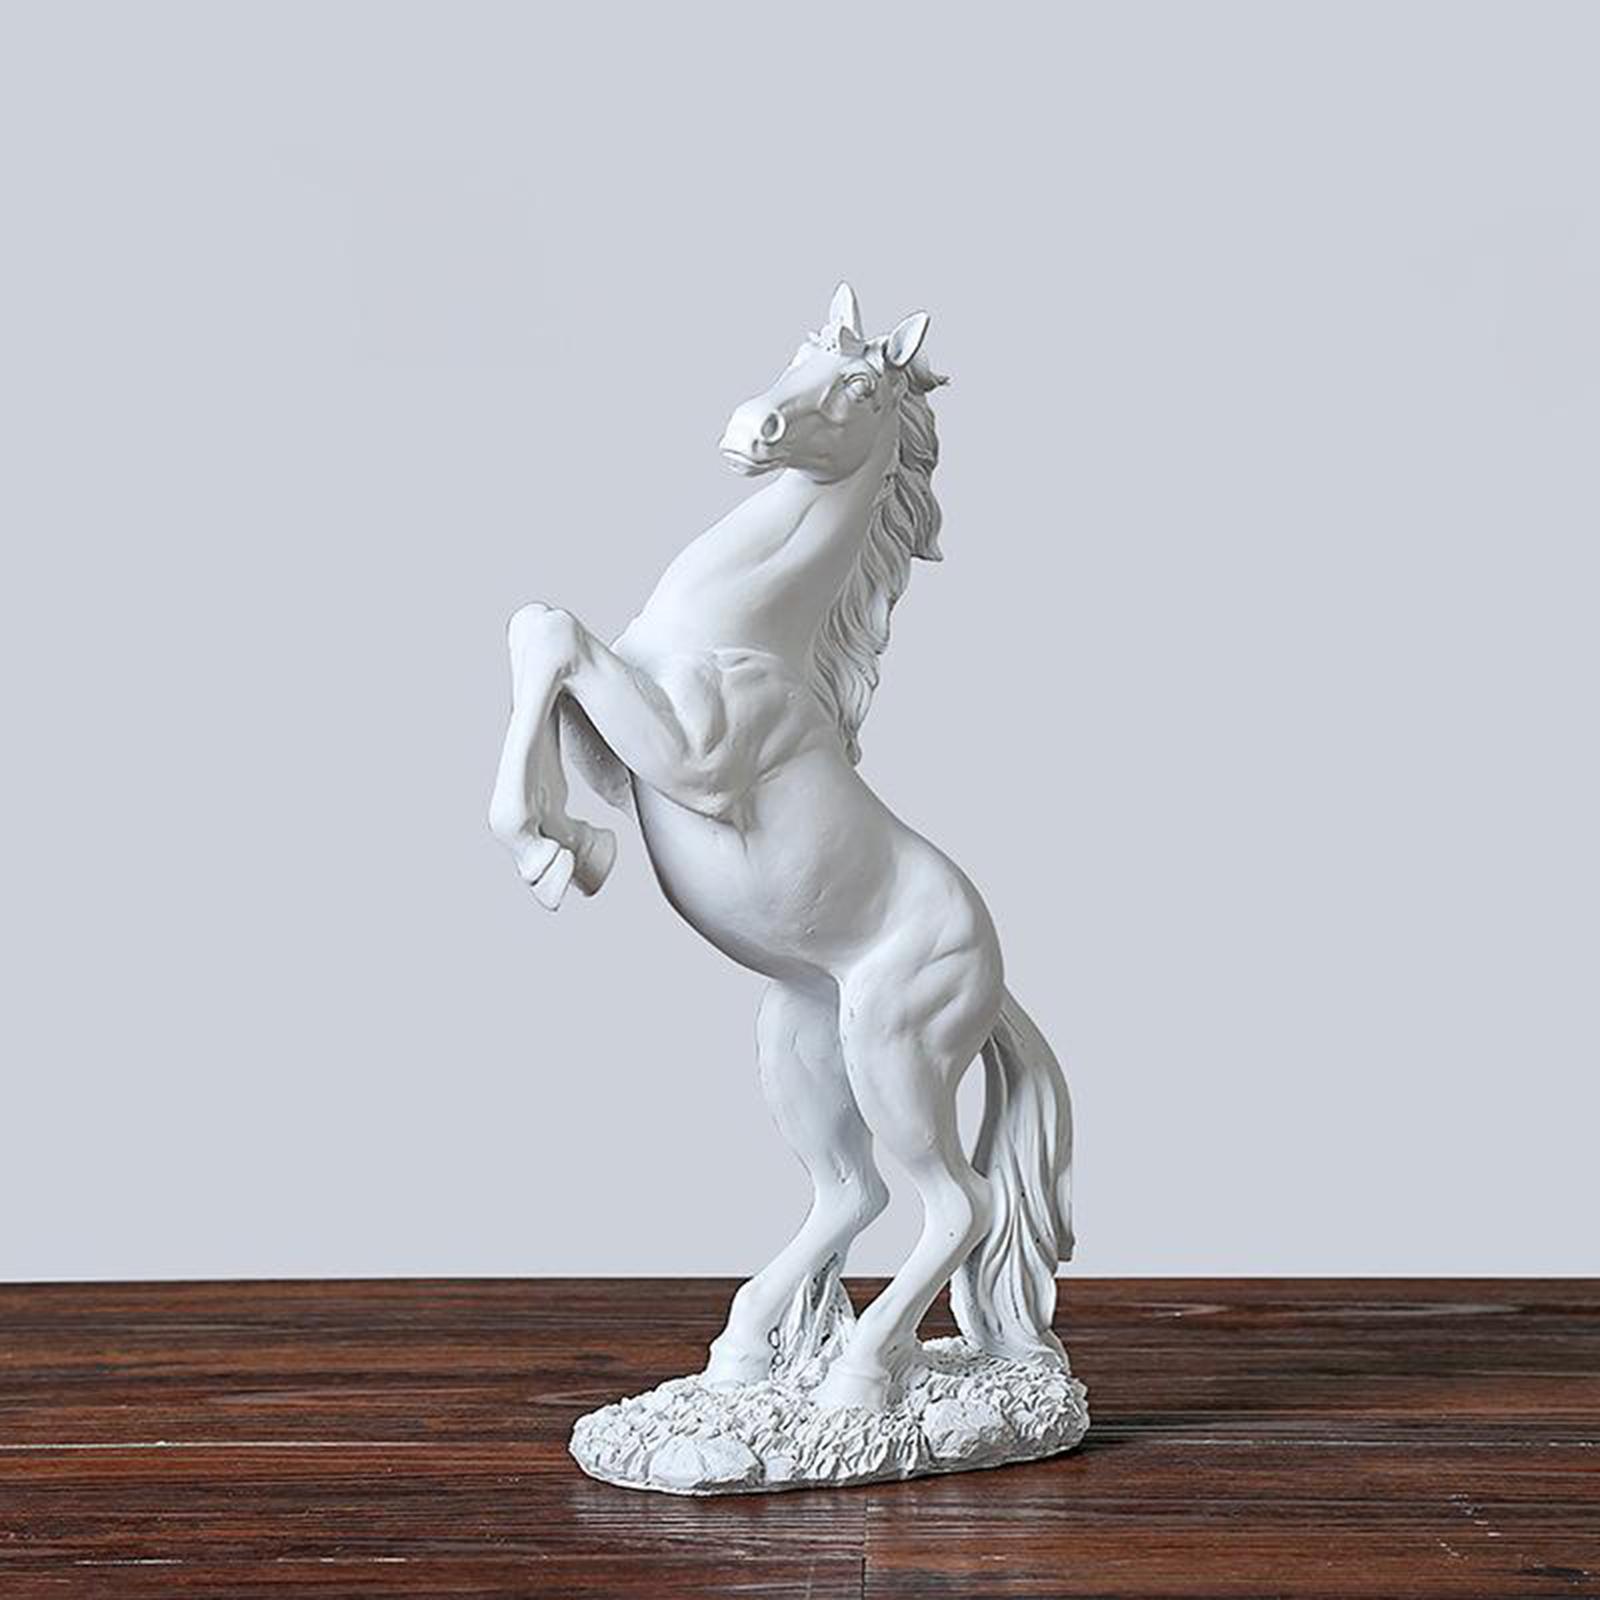 Figurine Horse, Resin Statue Galloping Horse, Modern Sculpture for Desk Decor, European Style, for Home/Office/Coffee Shops/Restaurant Decoration